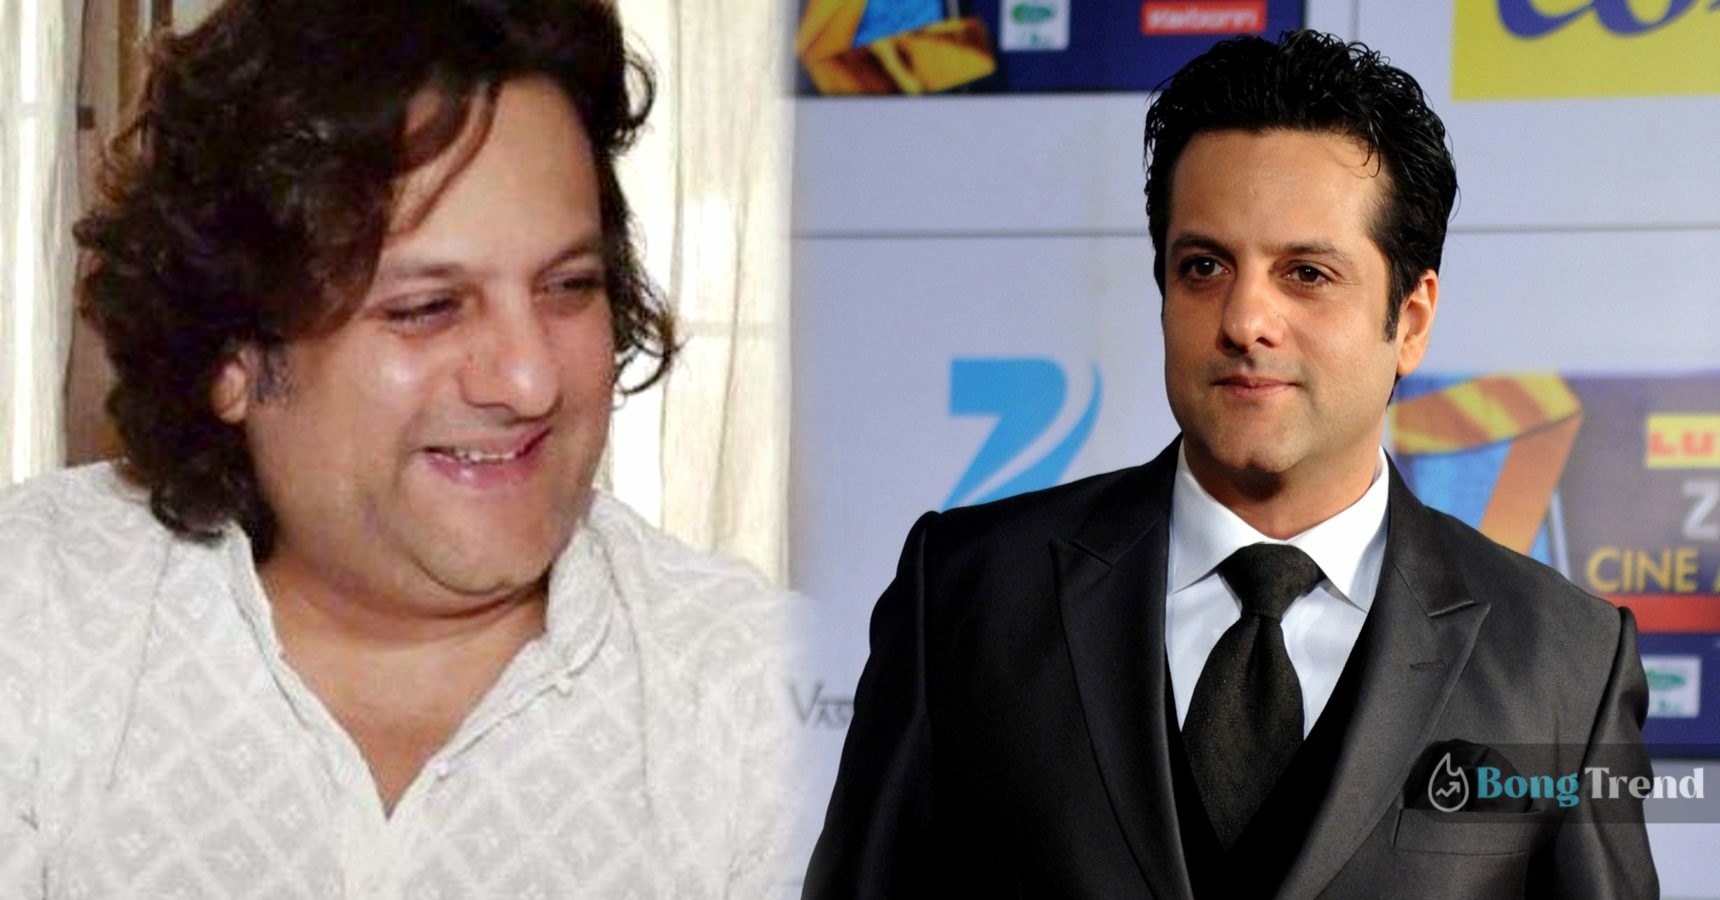 Fardeen Khan lost 18 Kg in past 6 Months set to comeback in bollywood